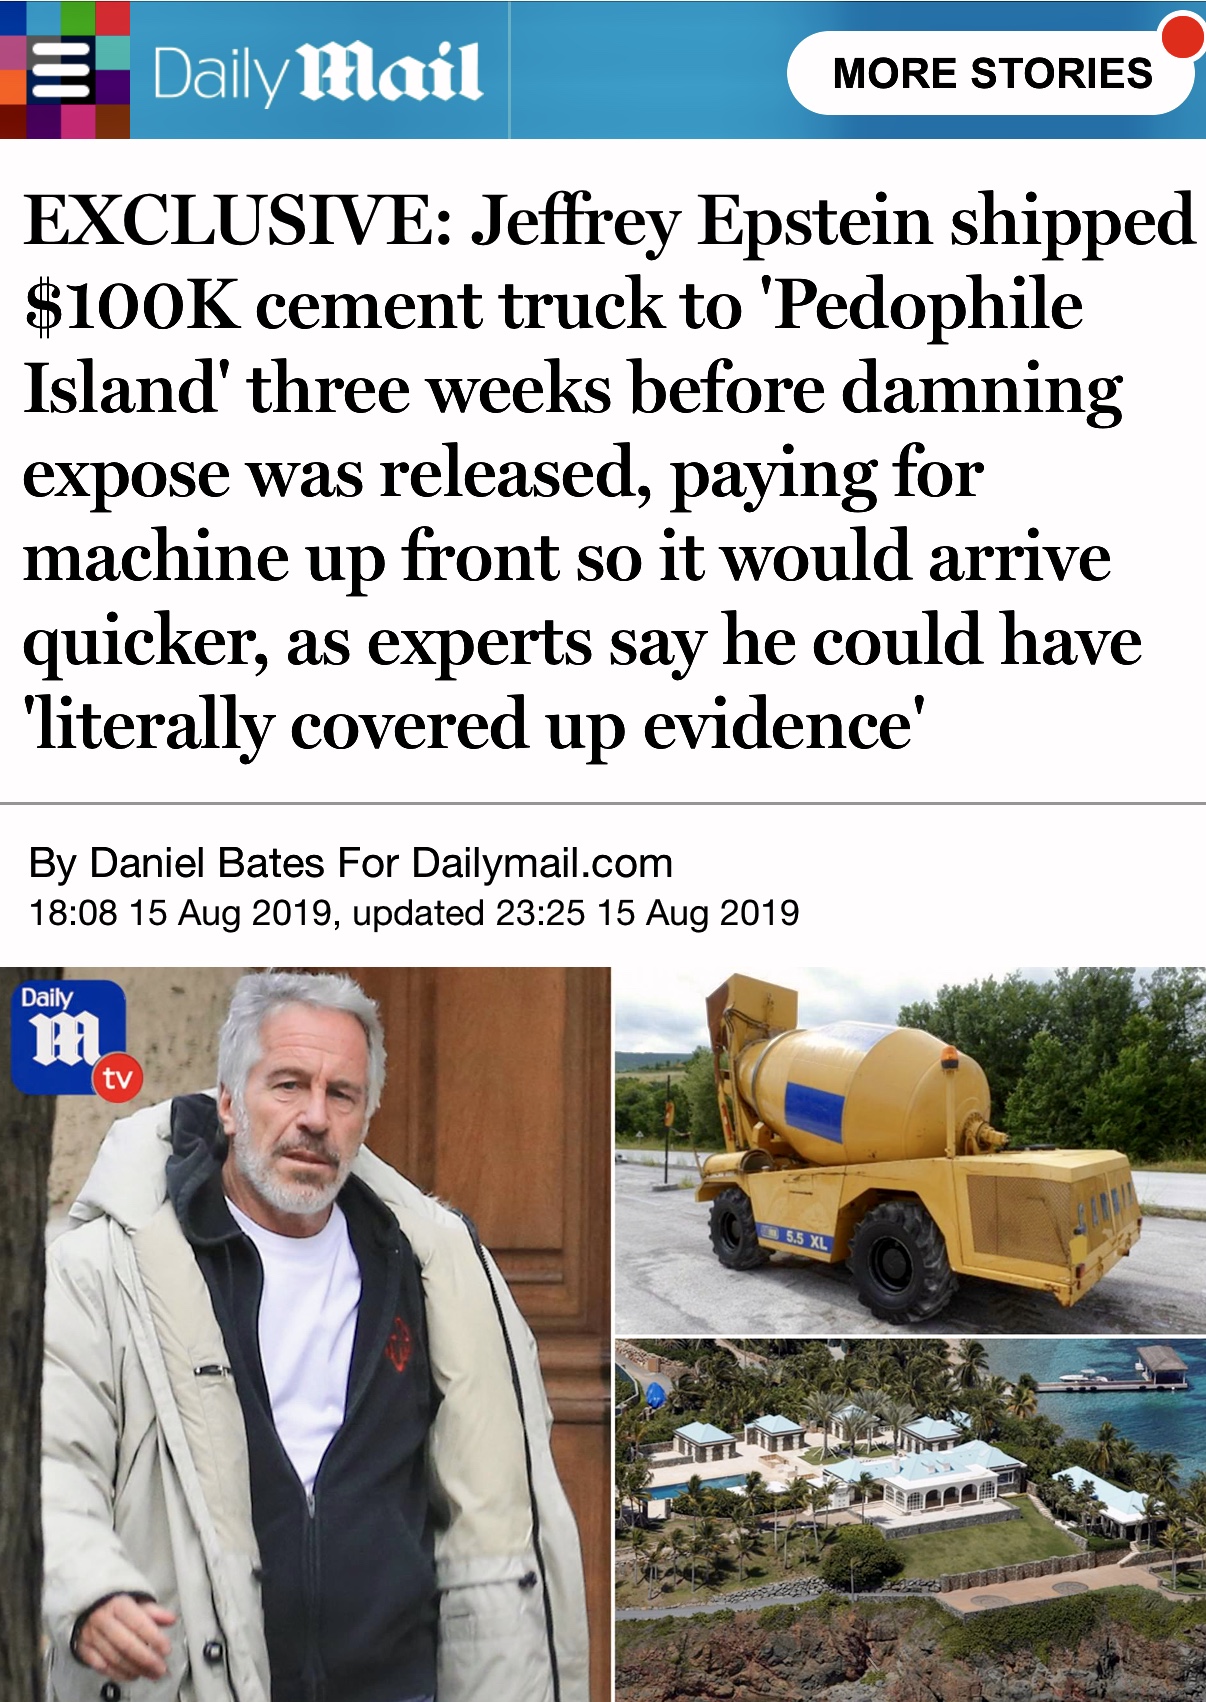 Jeffrey Epstein shipped $100 K cement truck to ‘Pedophile Island’ to cover up evidence’